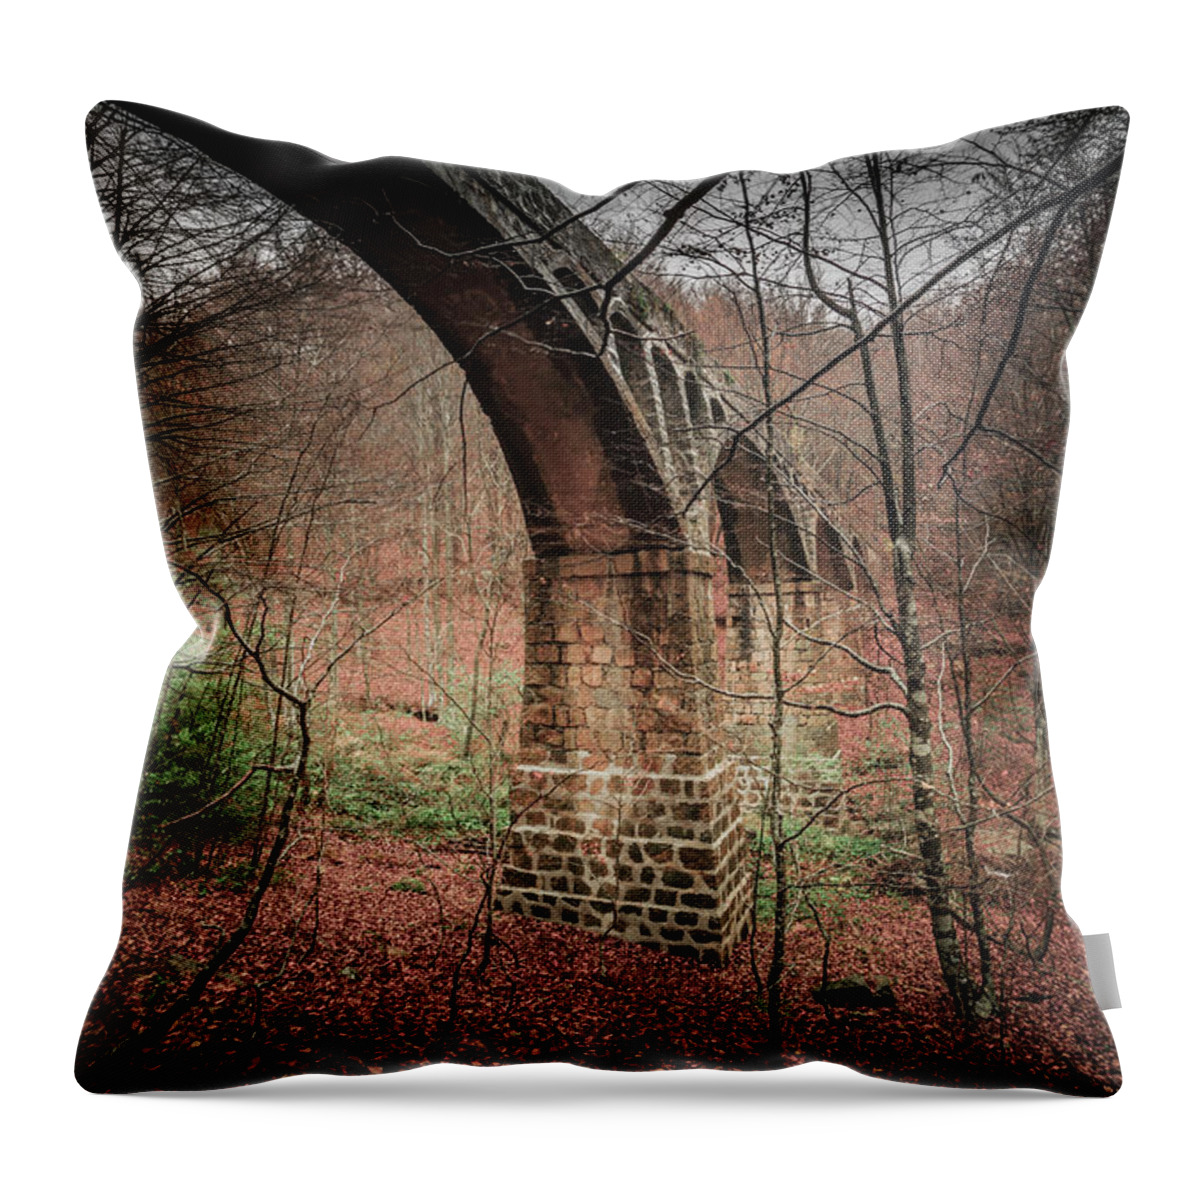 Tranquility Throw Pillow featuring the photograph Aqueduct In Montseny by Mafr Mcfa